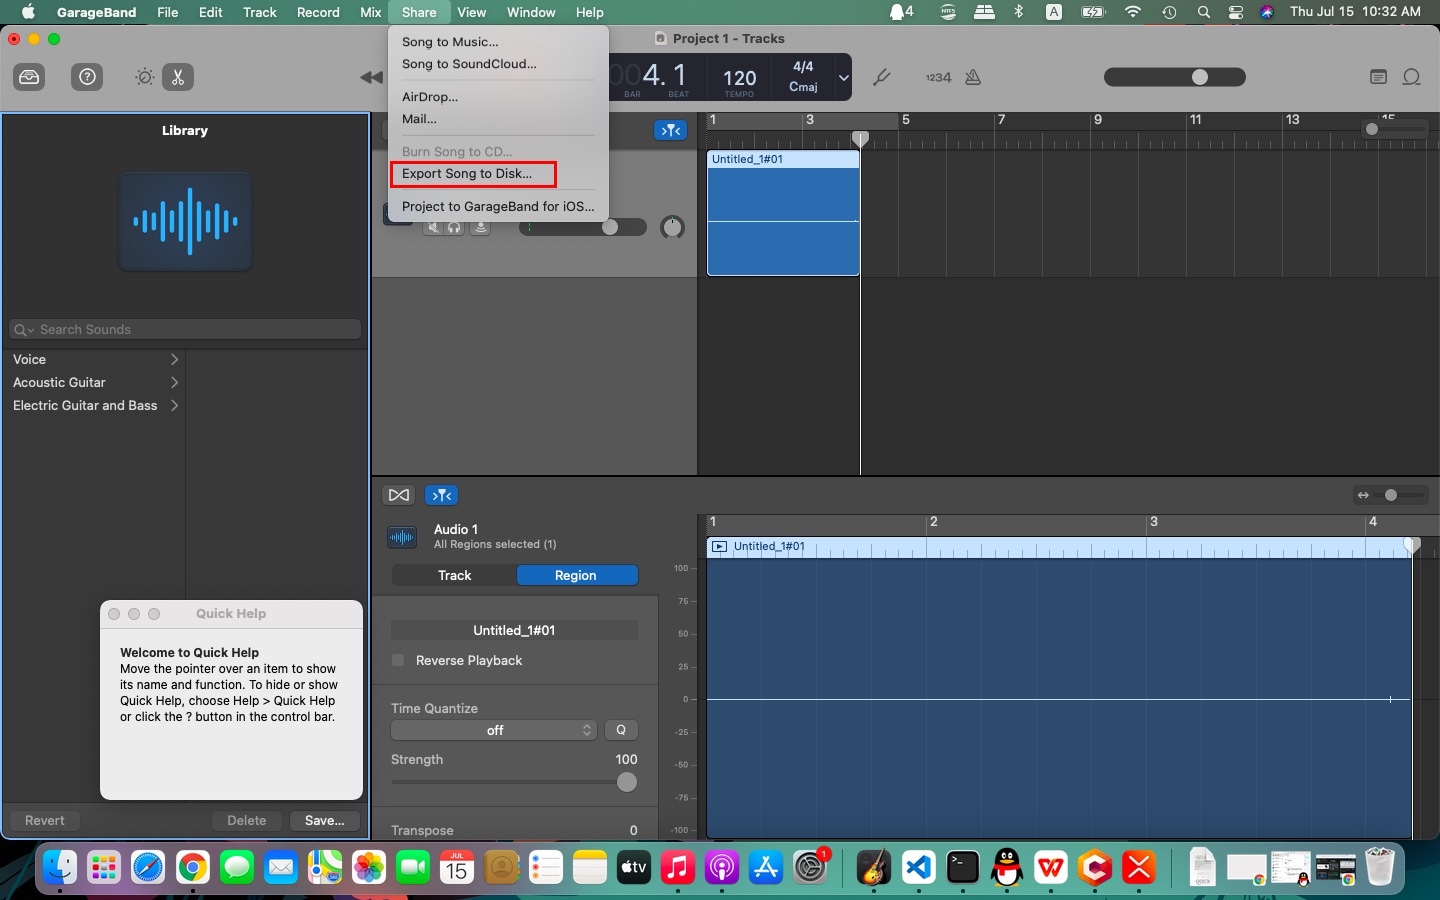 save to other forms on GarageBand